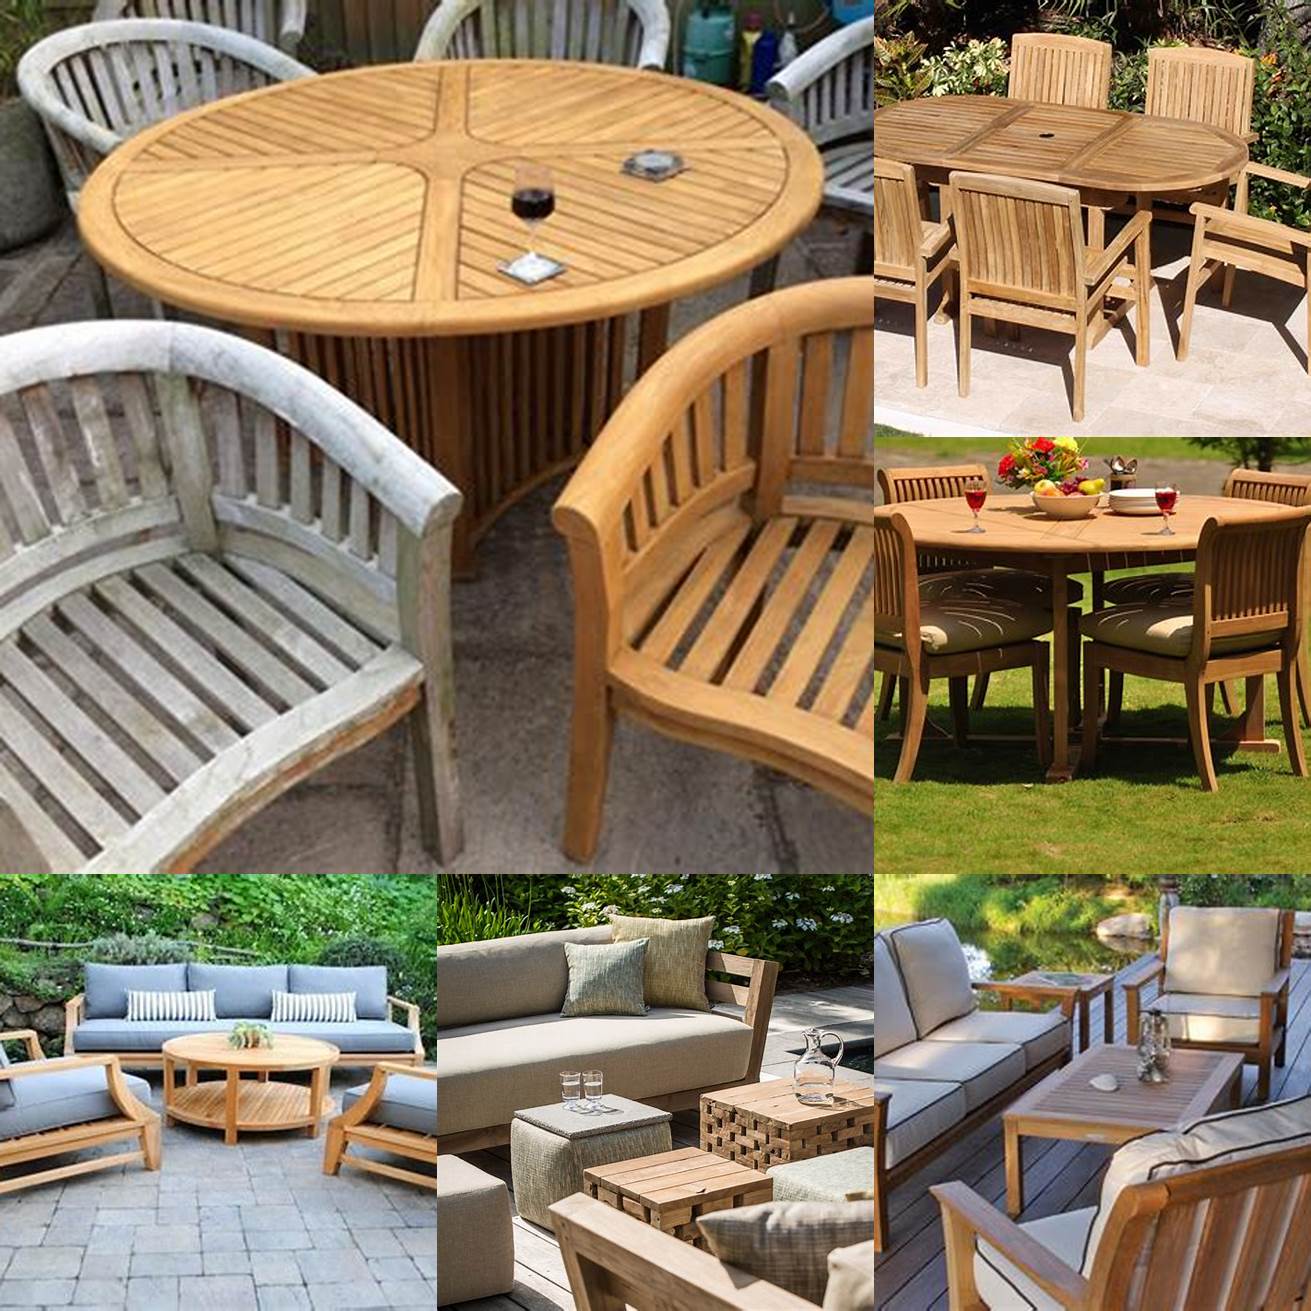 Teak furniture in different weather conditions